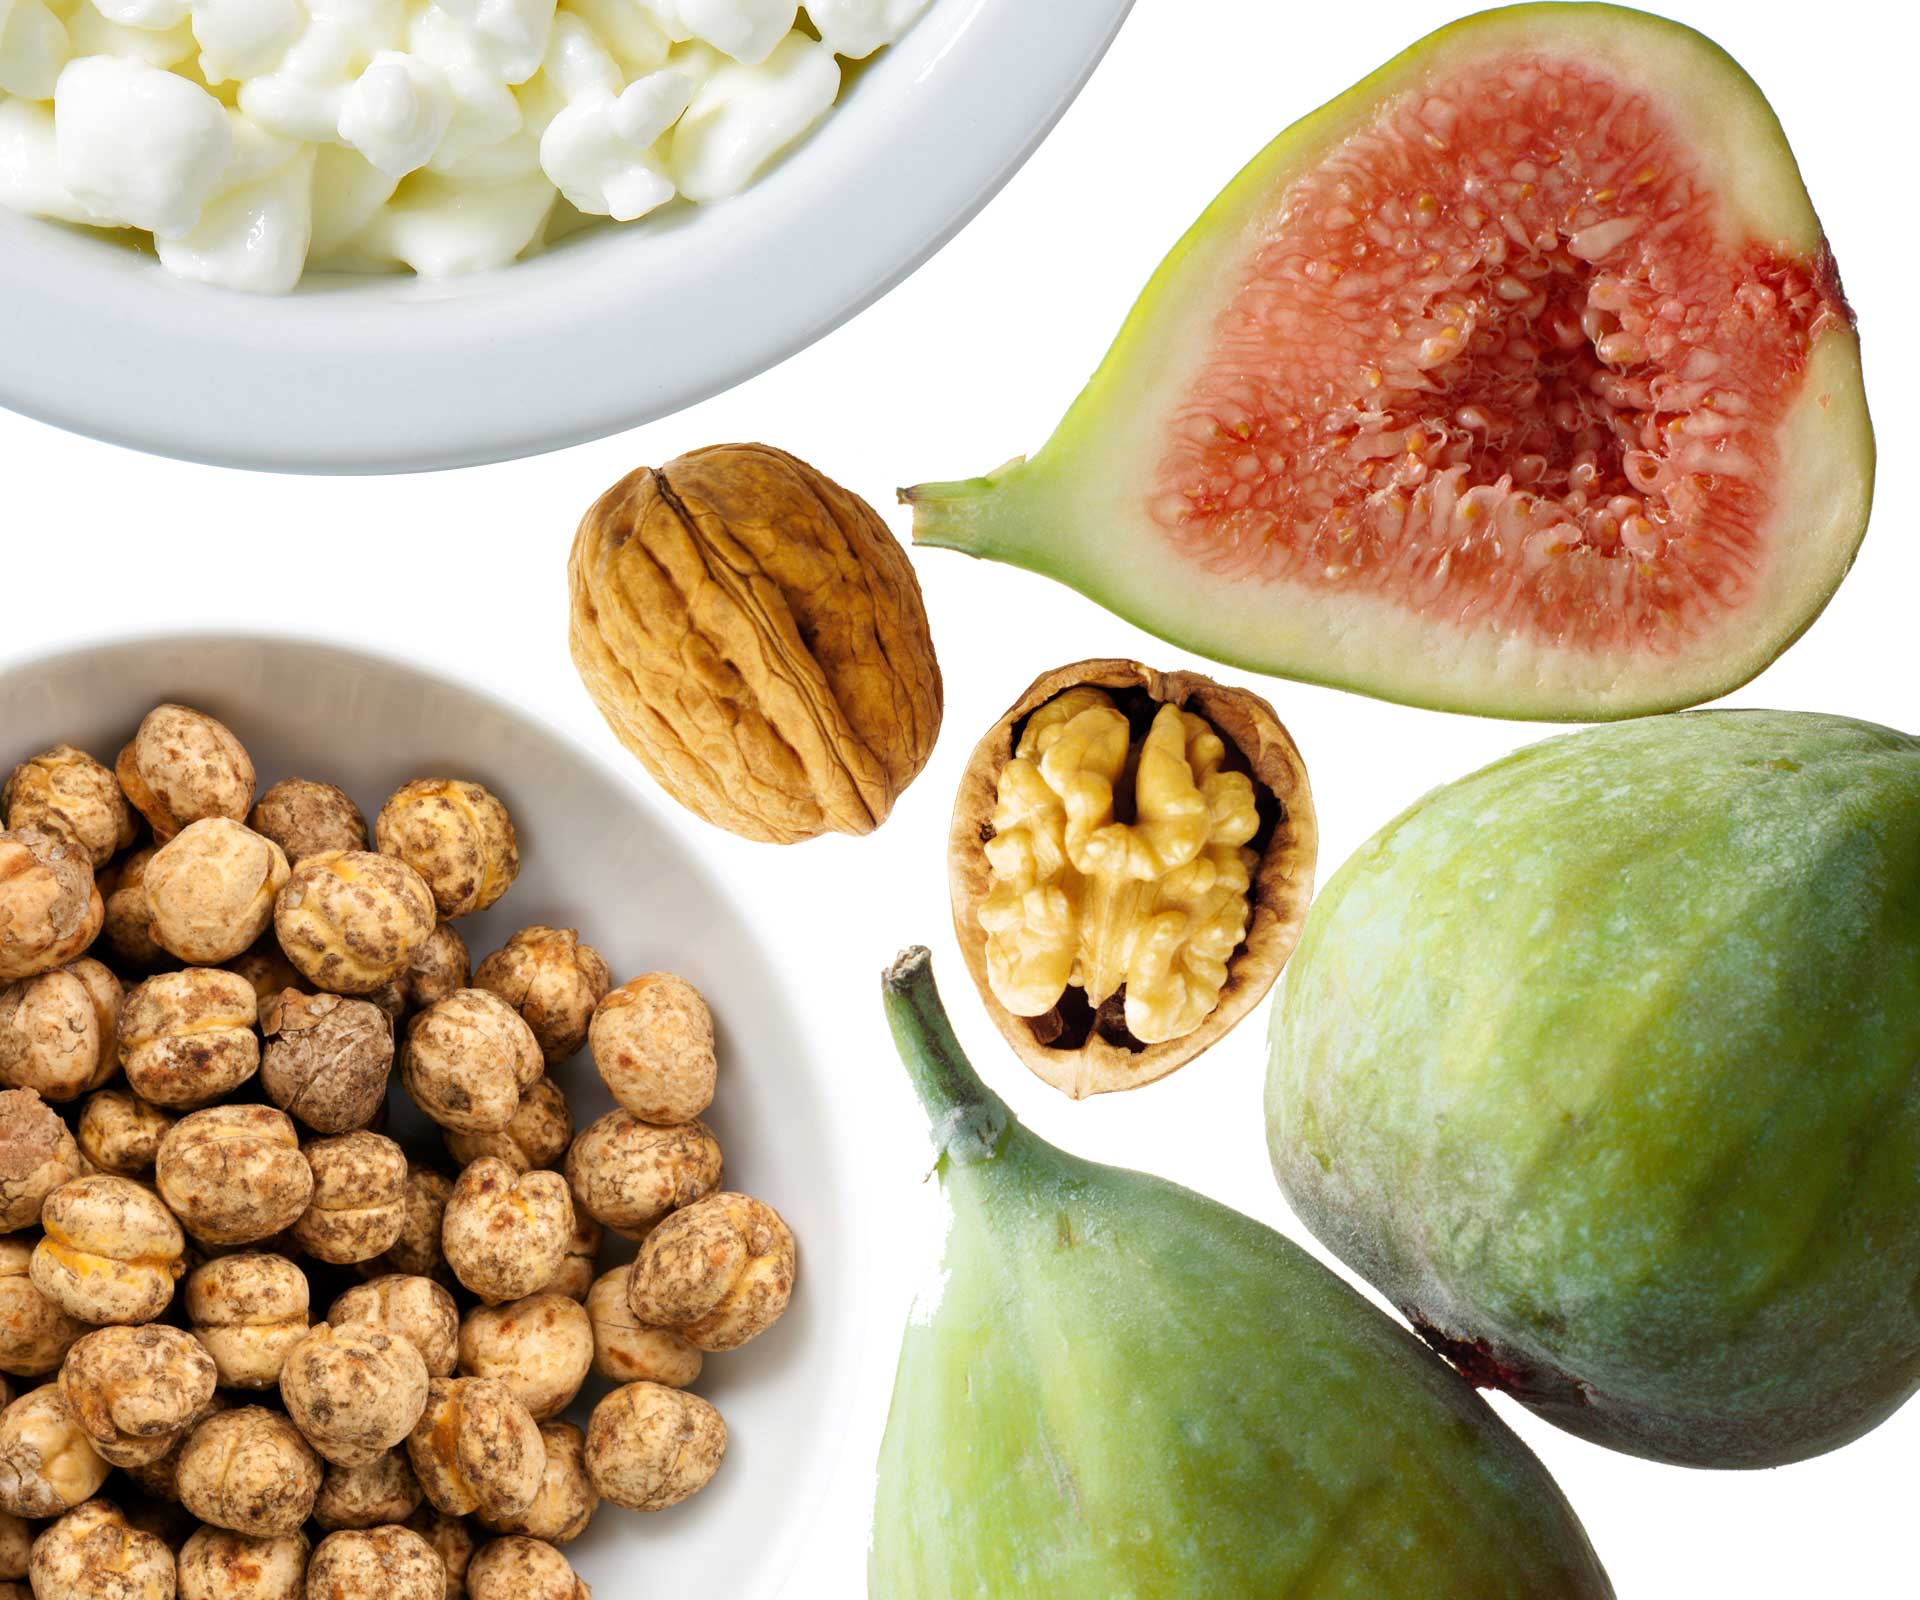 11 healthy snacks that will energise and sustain you